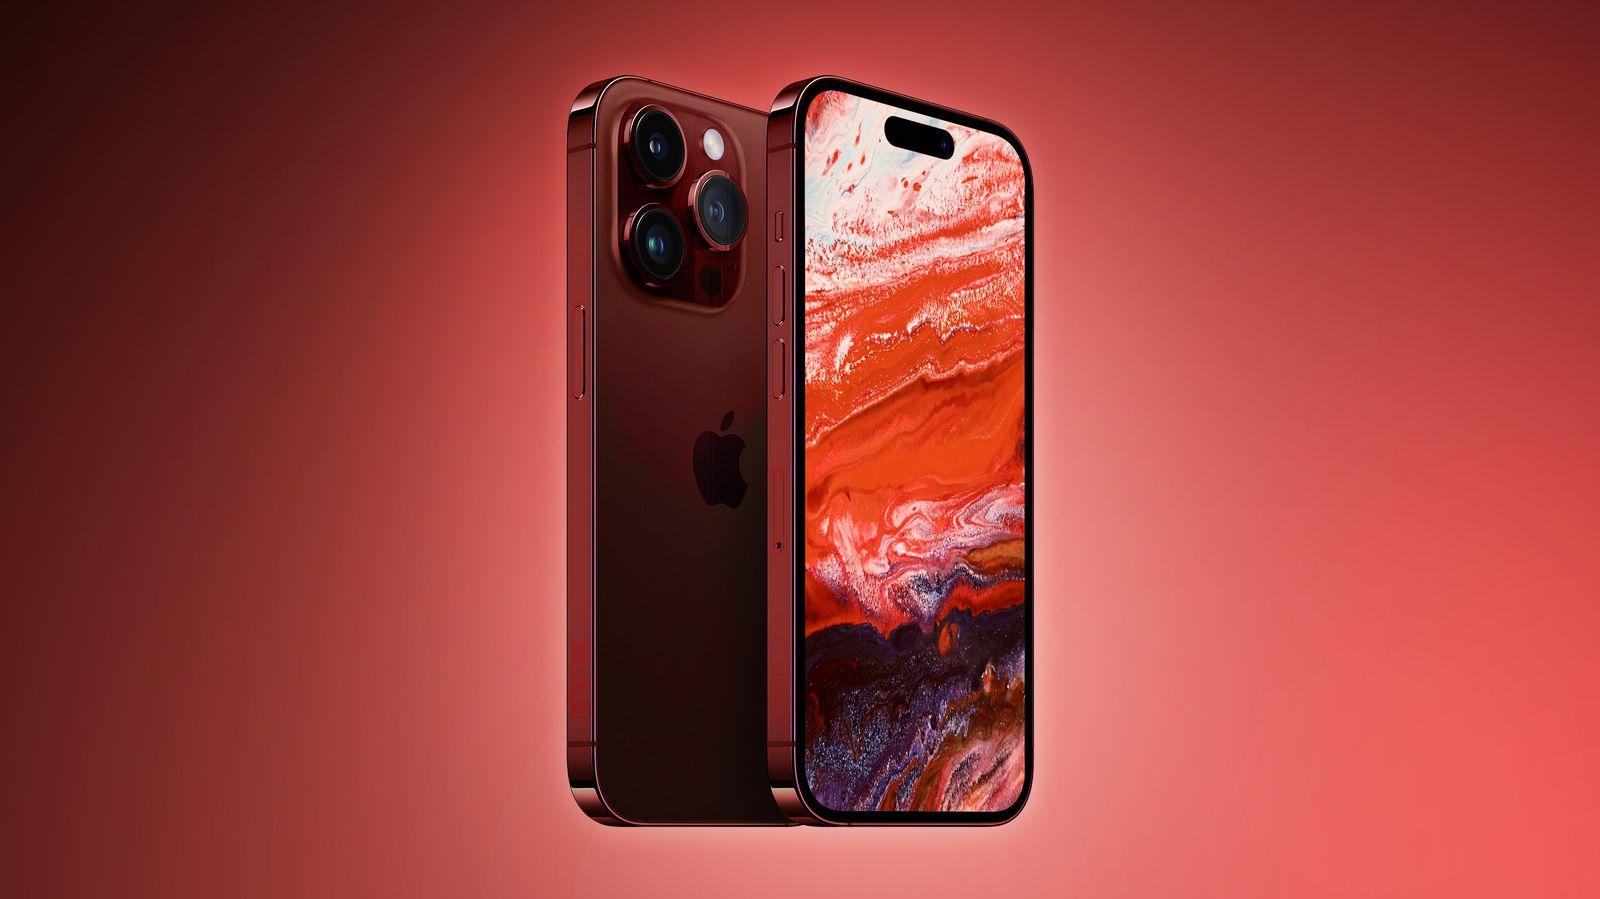 iPhone Pro Could Come in Dark Red With Pink and Light Blue